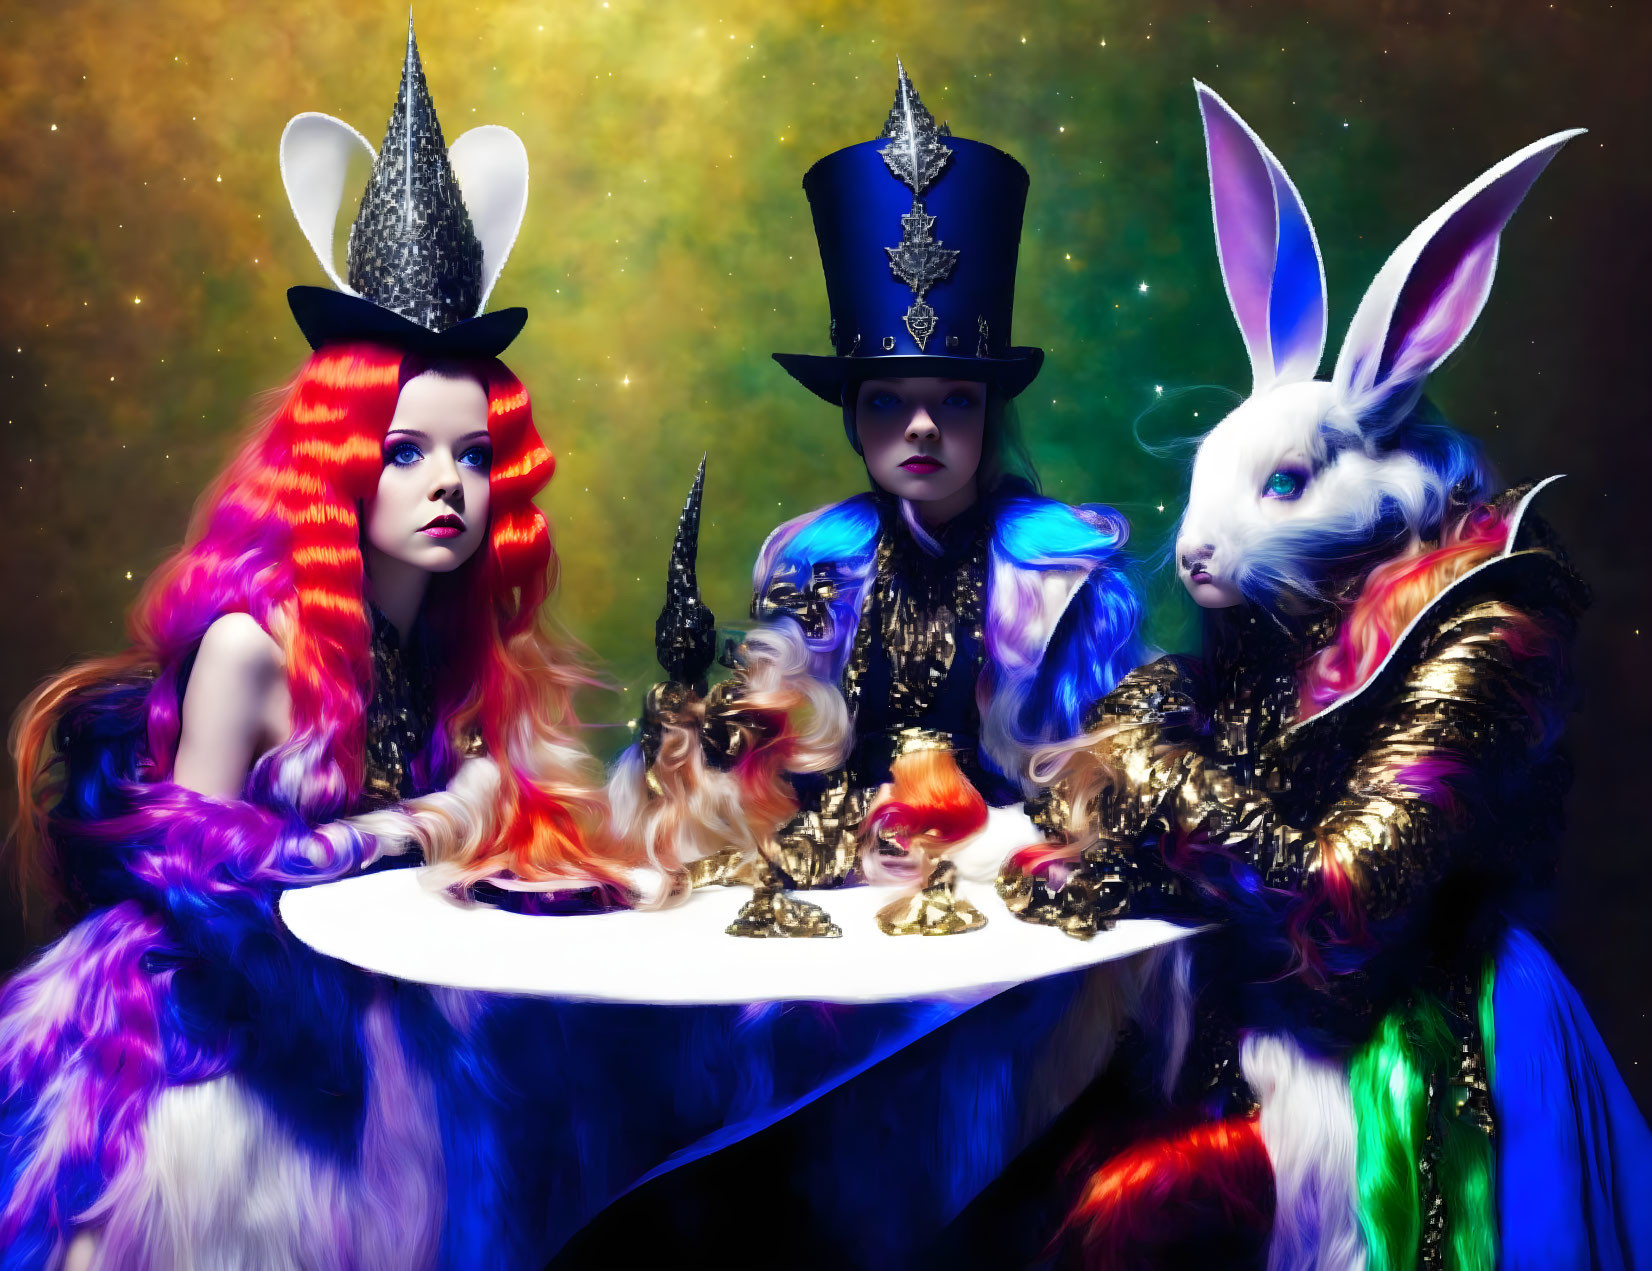 Colorful individuals in animal-themed costumes at ornate table with golden cups in celestial setting